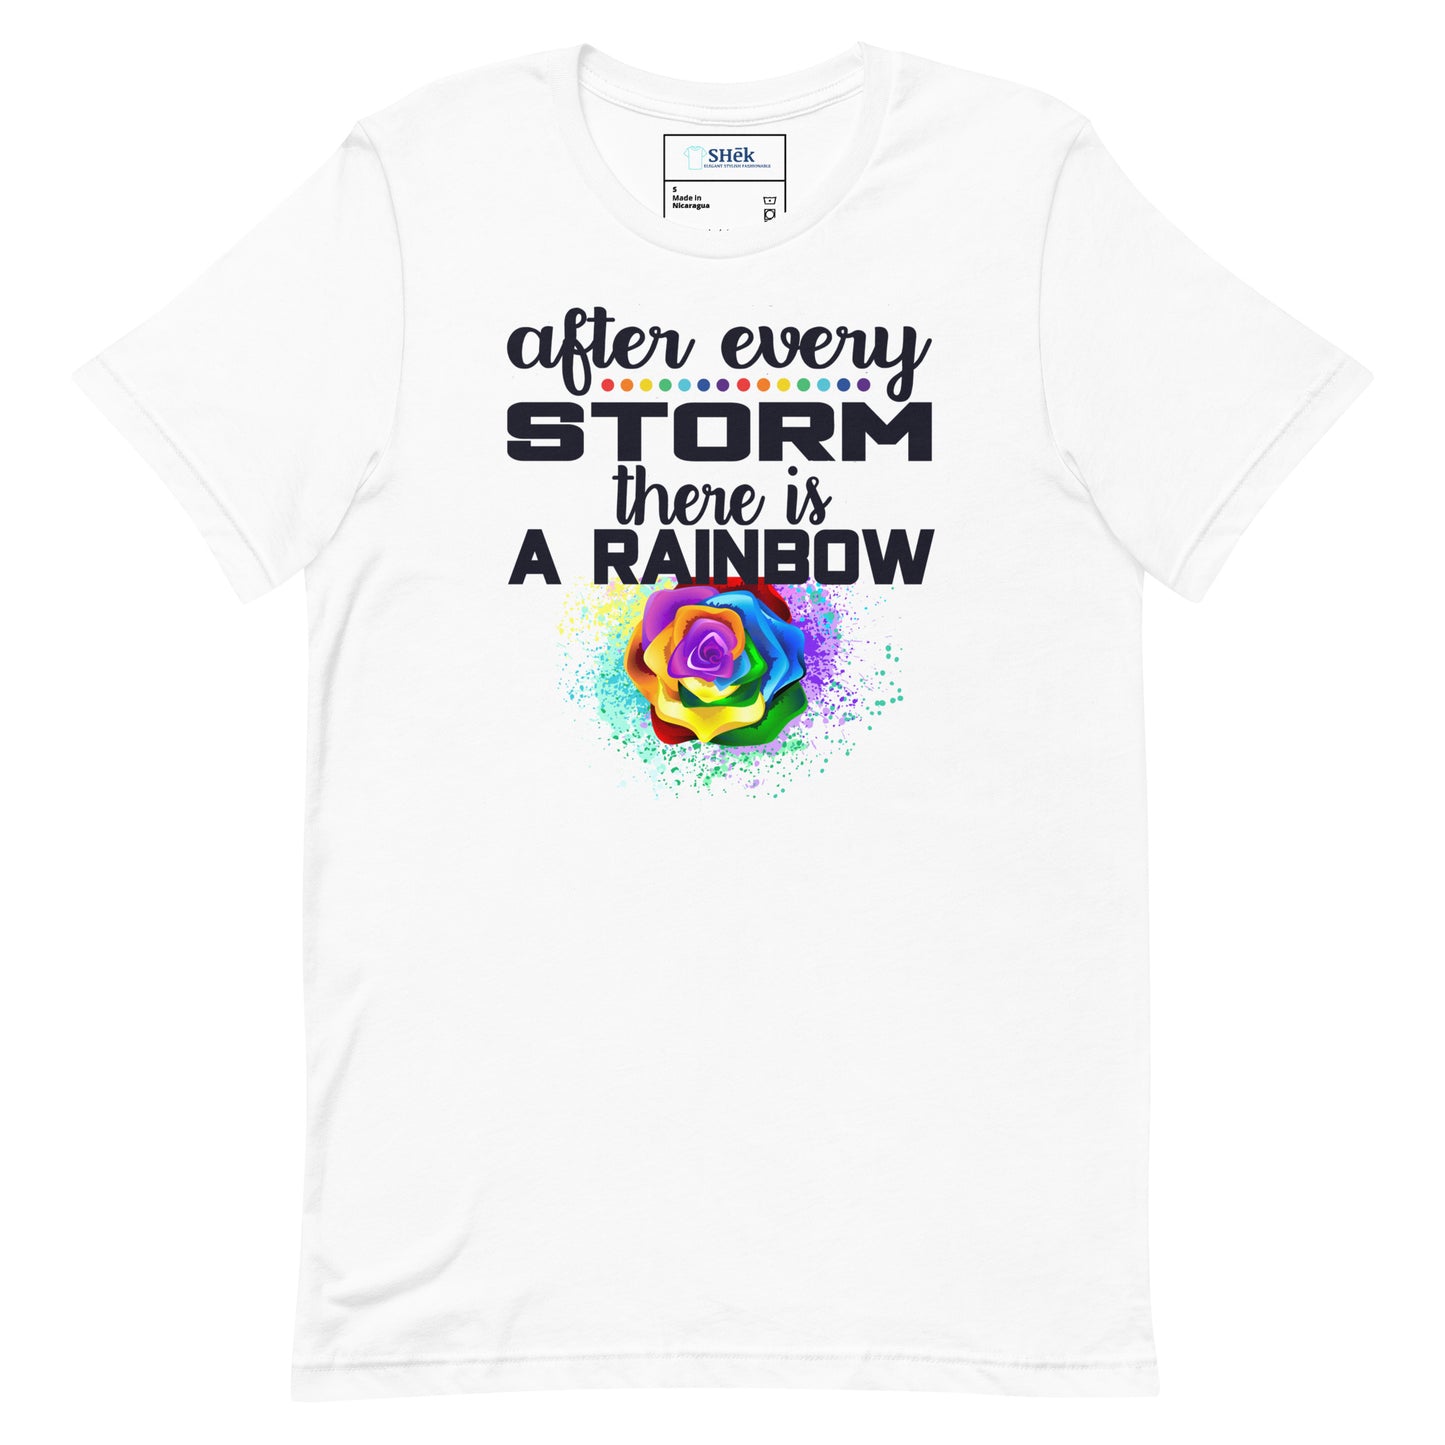 "After Every Storm is a Rainbow" T-shirt